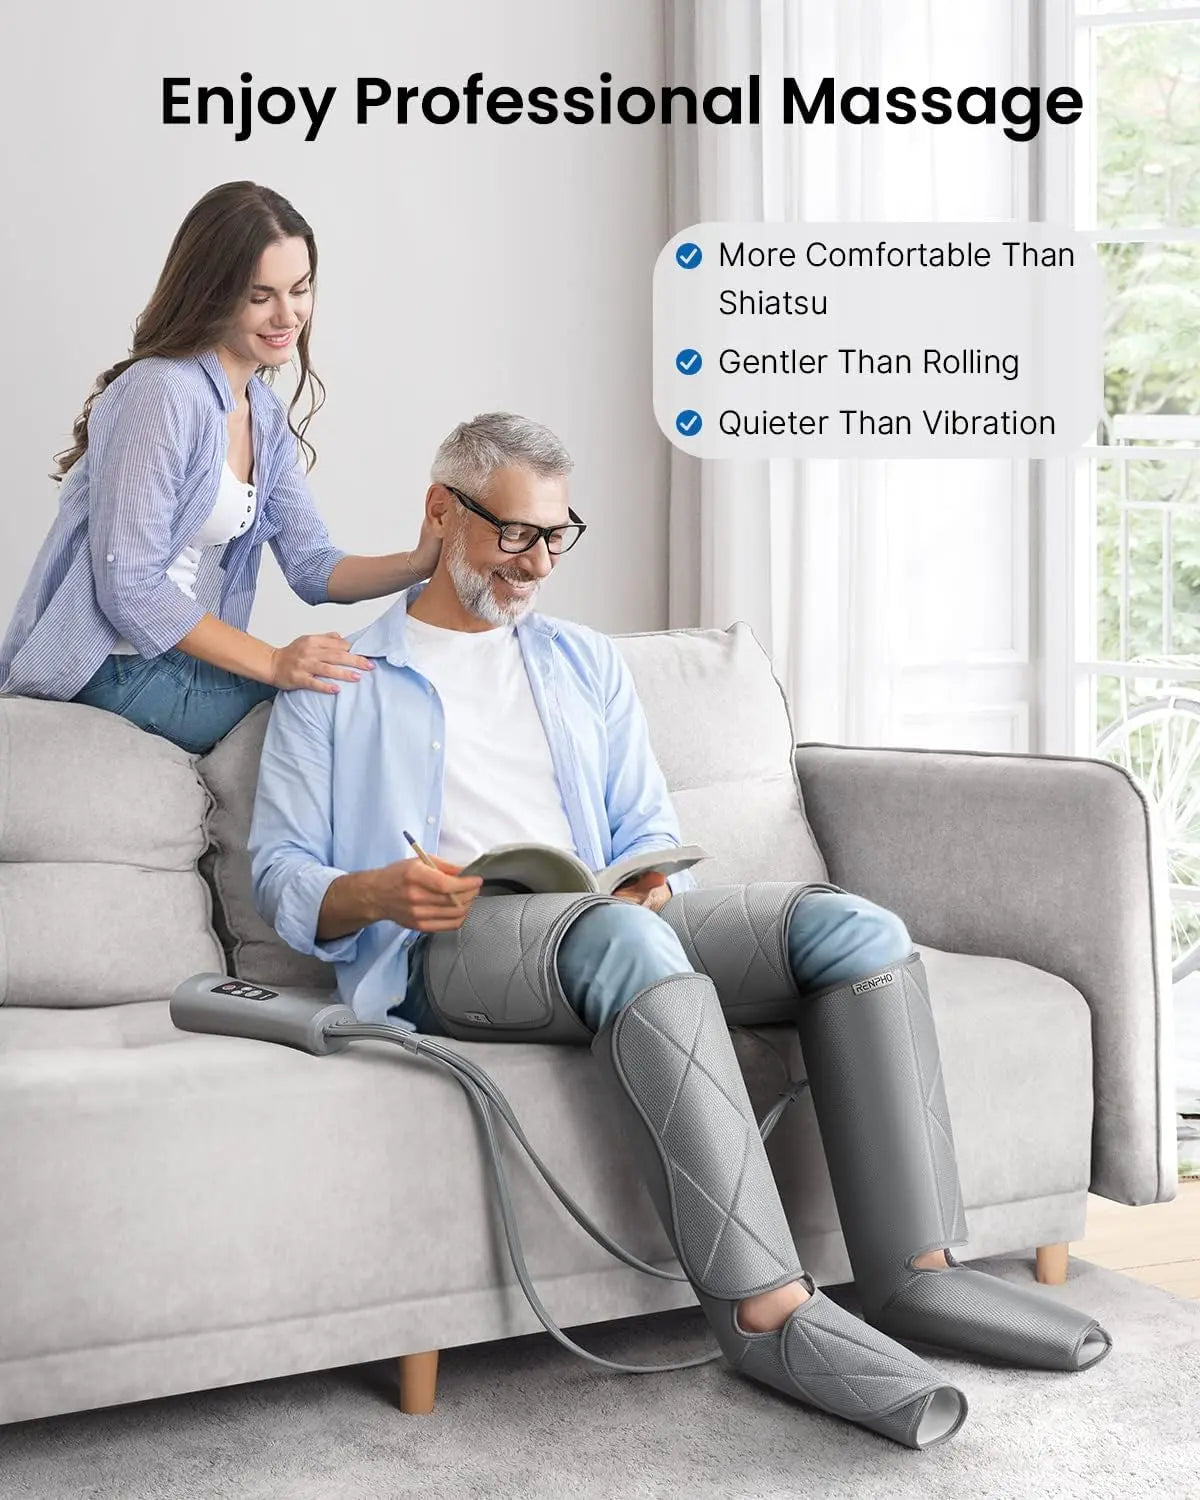 An older man sits on a gray couch wearing Aeria Ultimate Thermal Full Leg Massager devices by Renpho EU, reading while a younger woman stands behind him smiling. Text above reads "Enjoy Professional Massage," with a side list that says "More Comfortable Than Shiatsu," "Gentler Than Rolling," "Quieter Than Vibration," and "Heat Comfort for Ultimate Tension Relief.